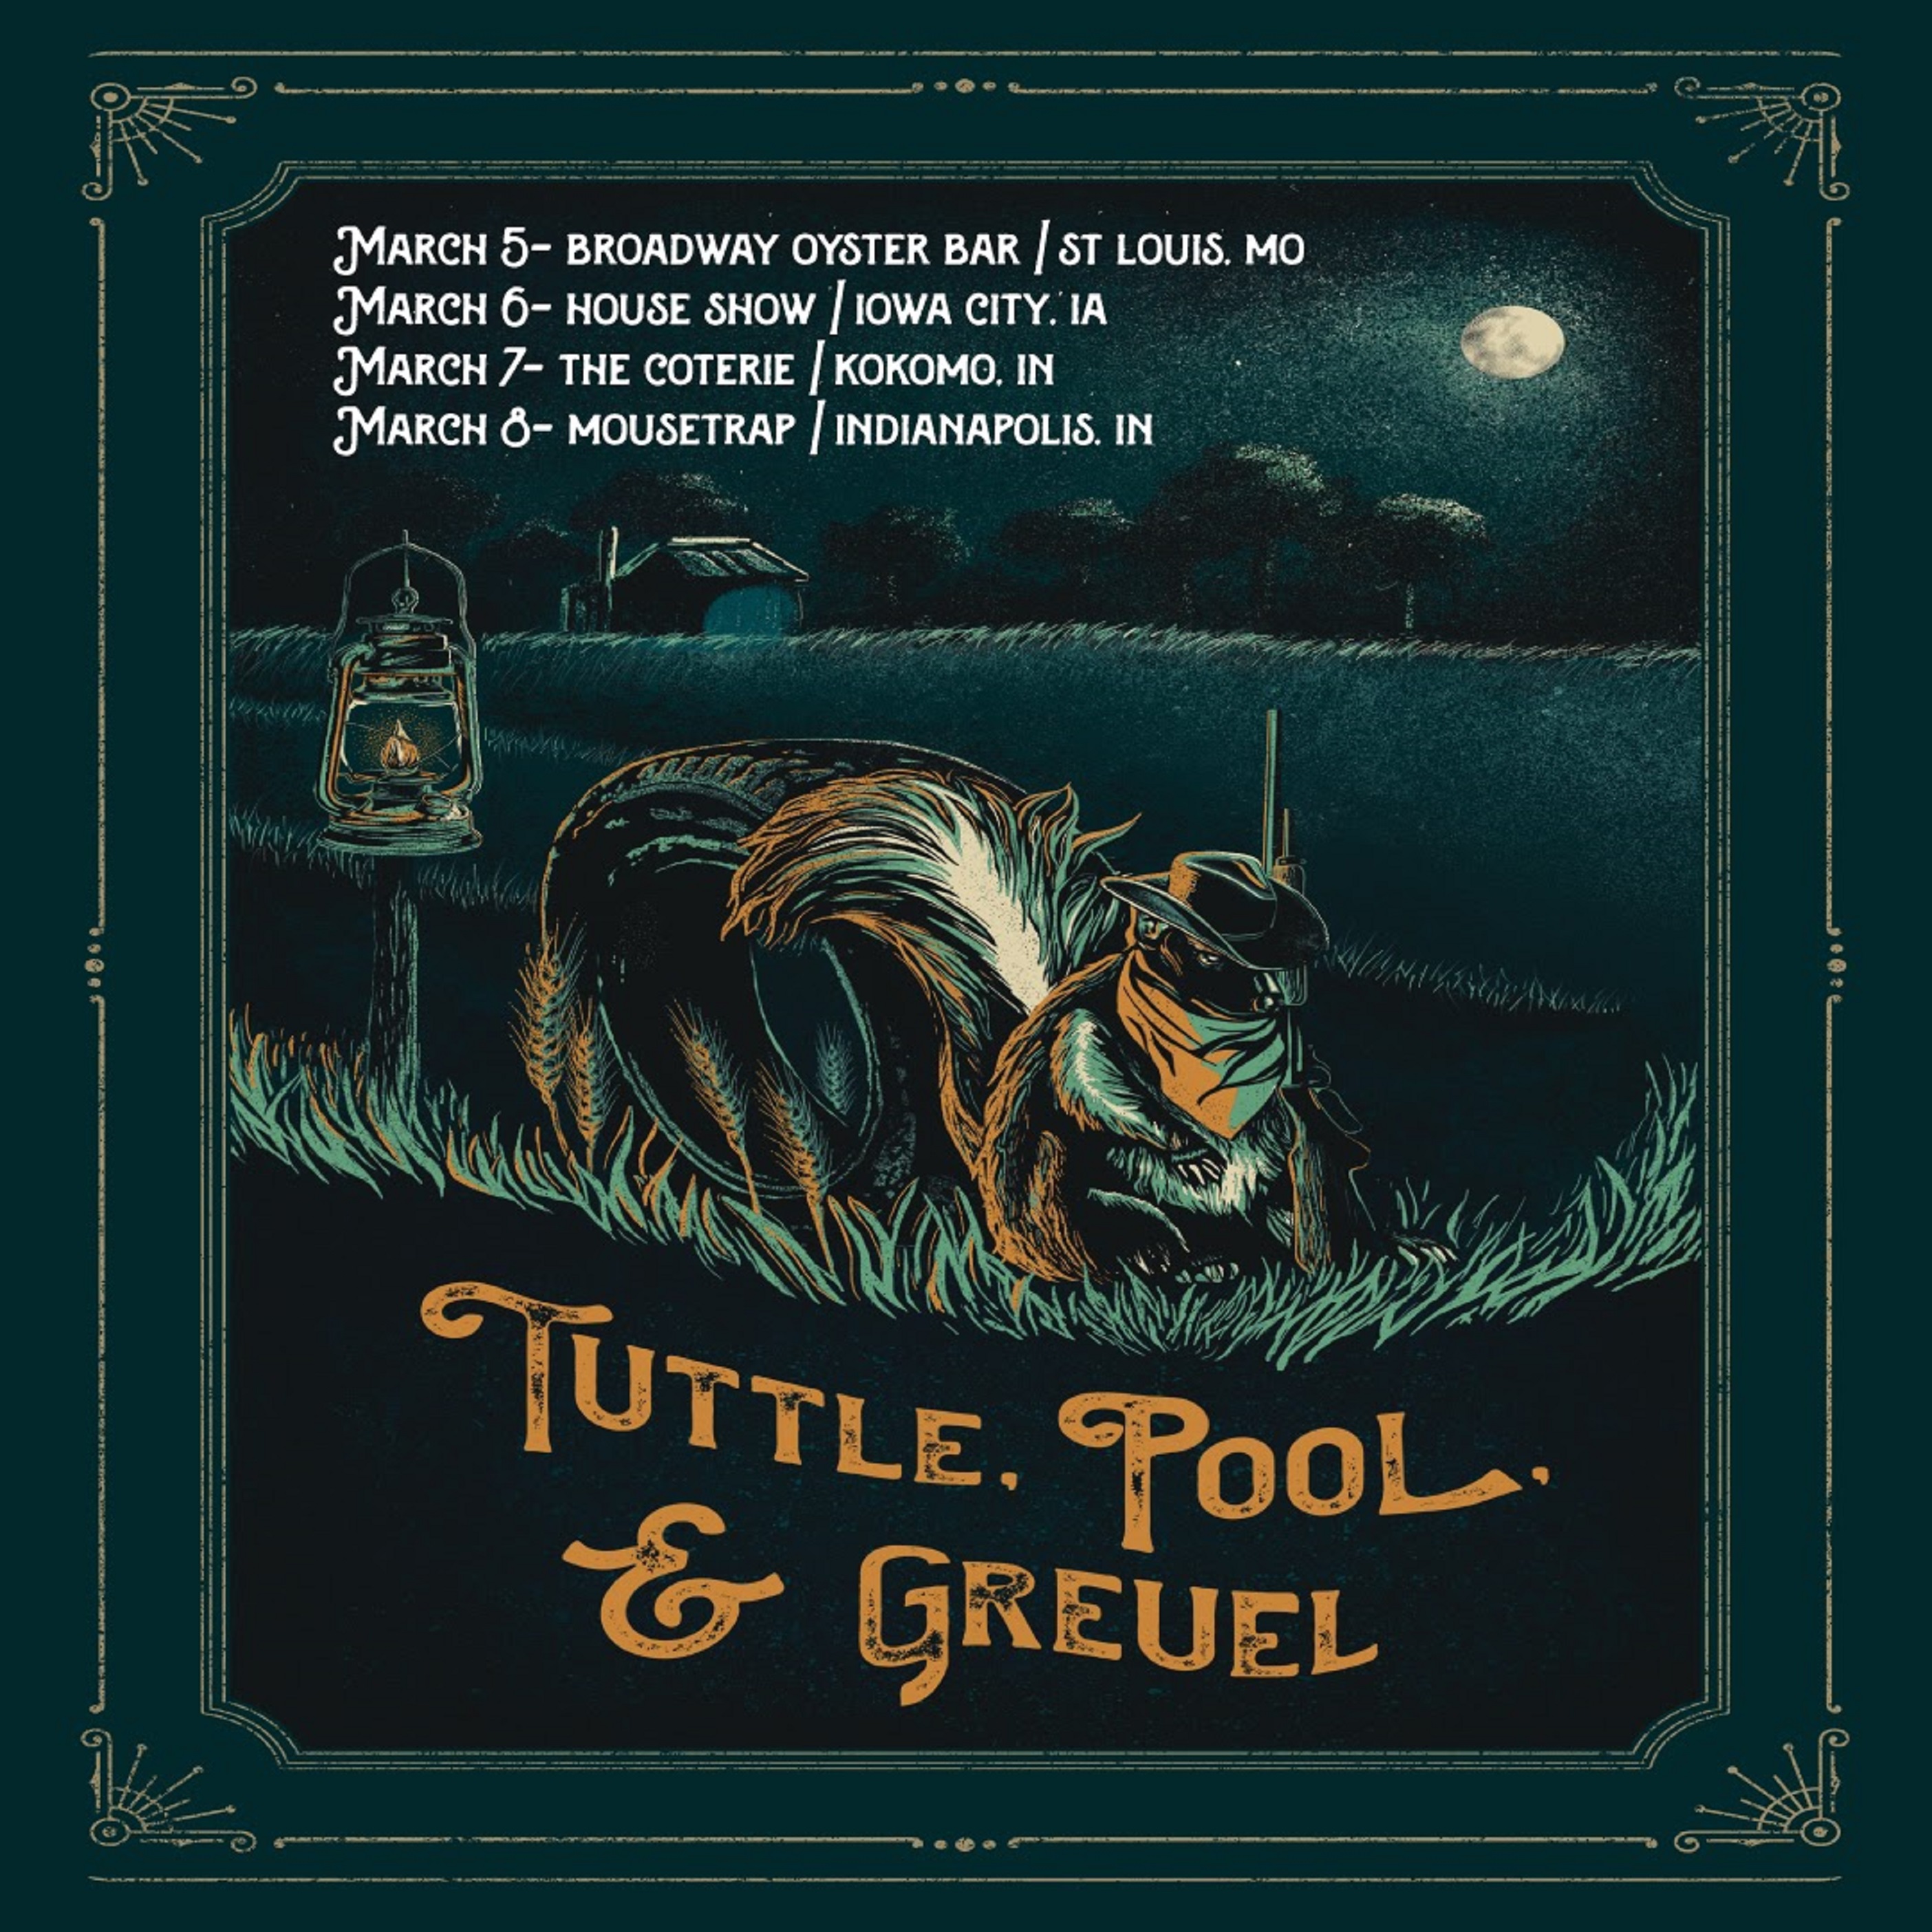 Tuttle, Pool & Greuel Bluegrass Collaboration Team Up for Special Trio Shows